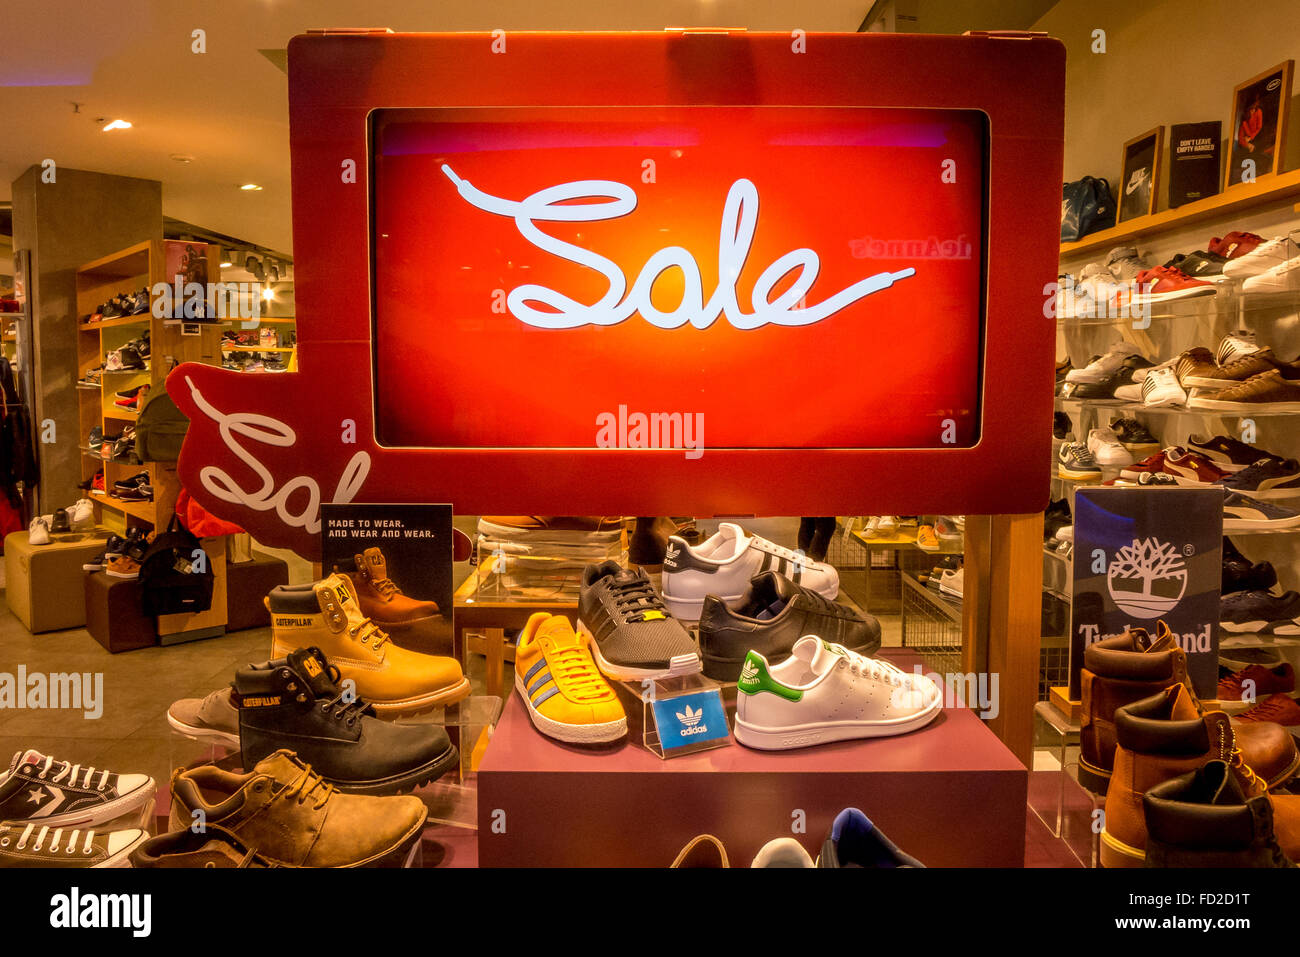 brighton shoes on sale